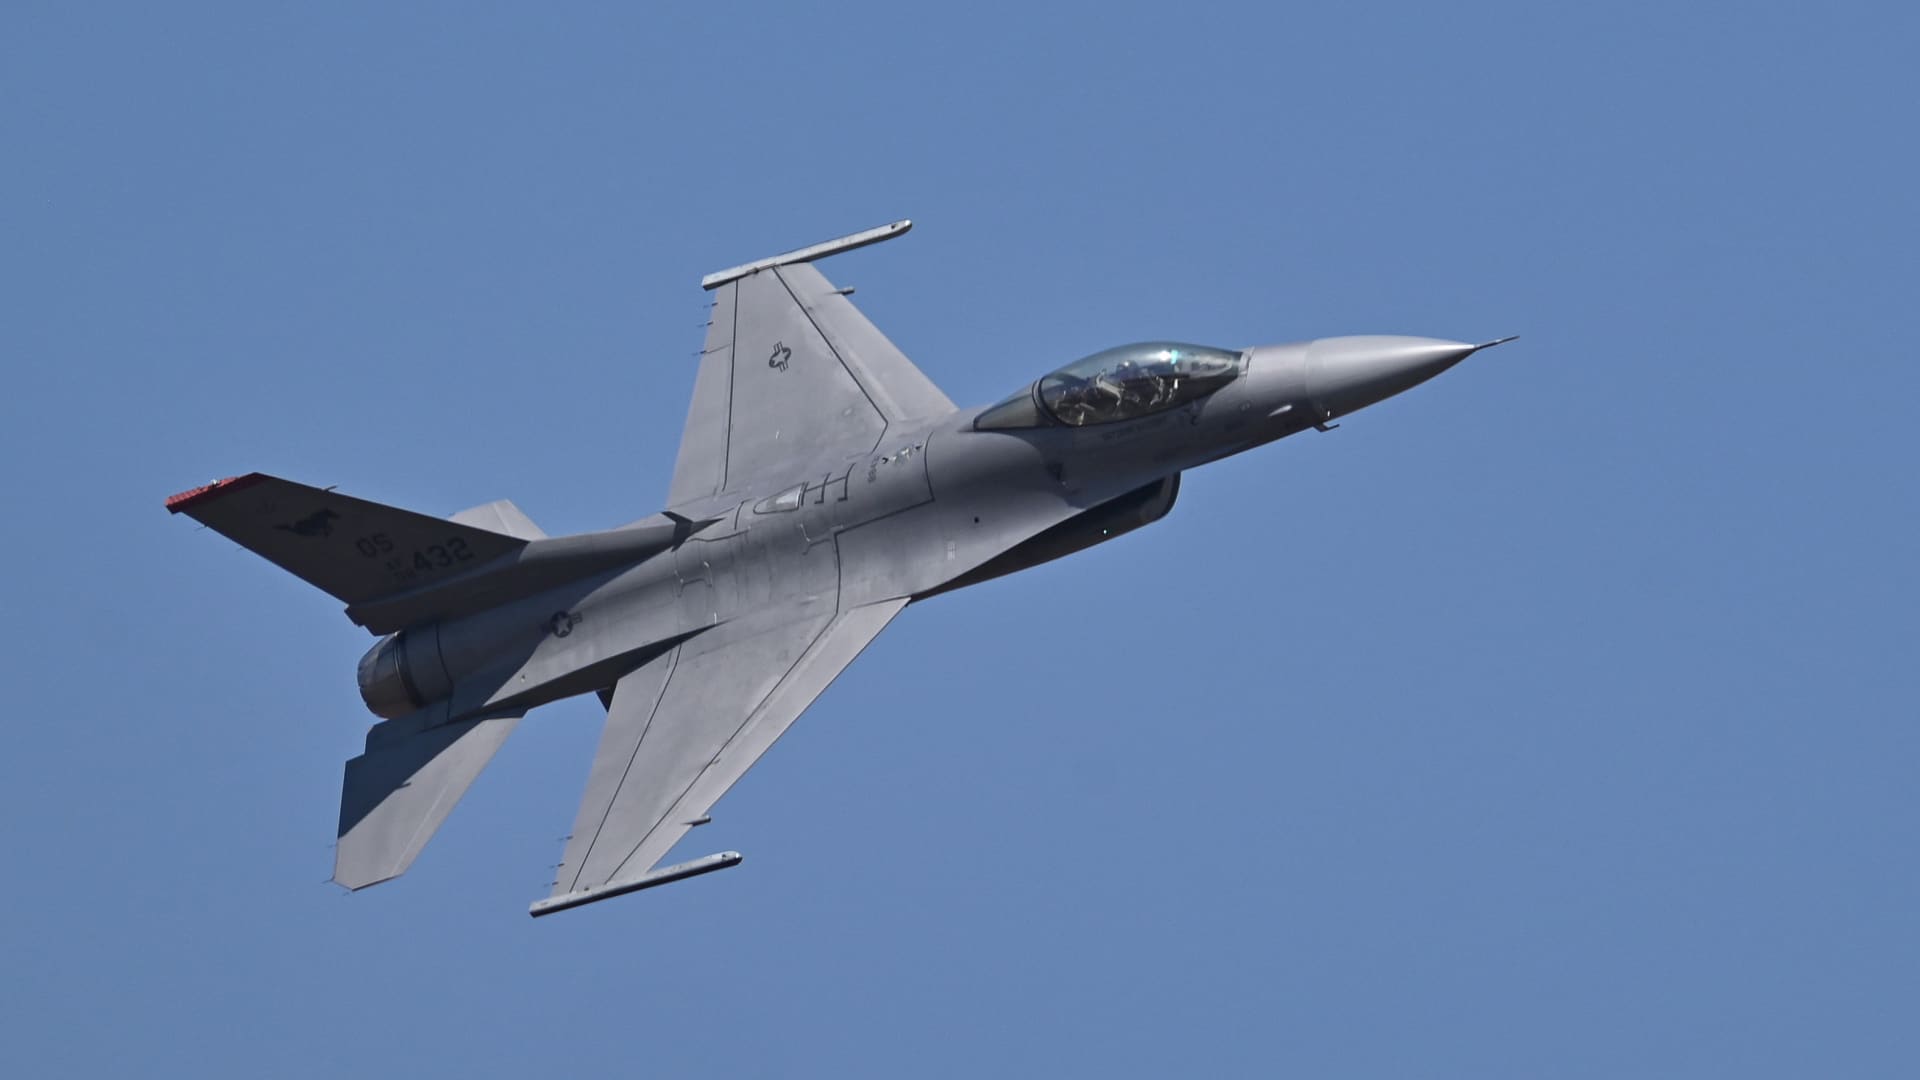 A U.S. Air Force F-16 Fighting Falcon fighter jet on the second day of Aero India 2023 in Bengaluru on Feb. 14, 2023.